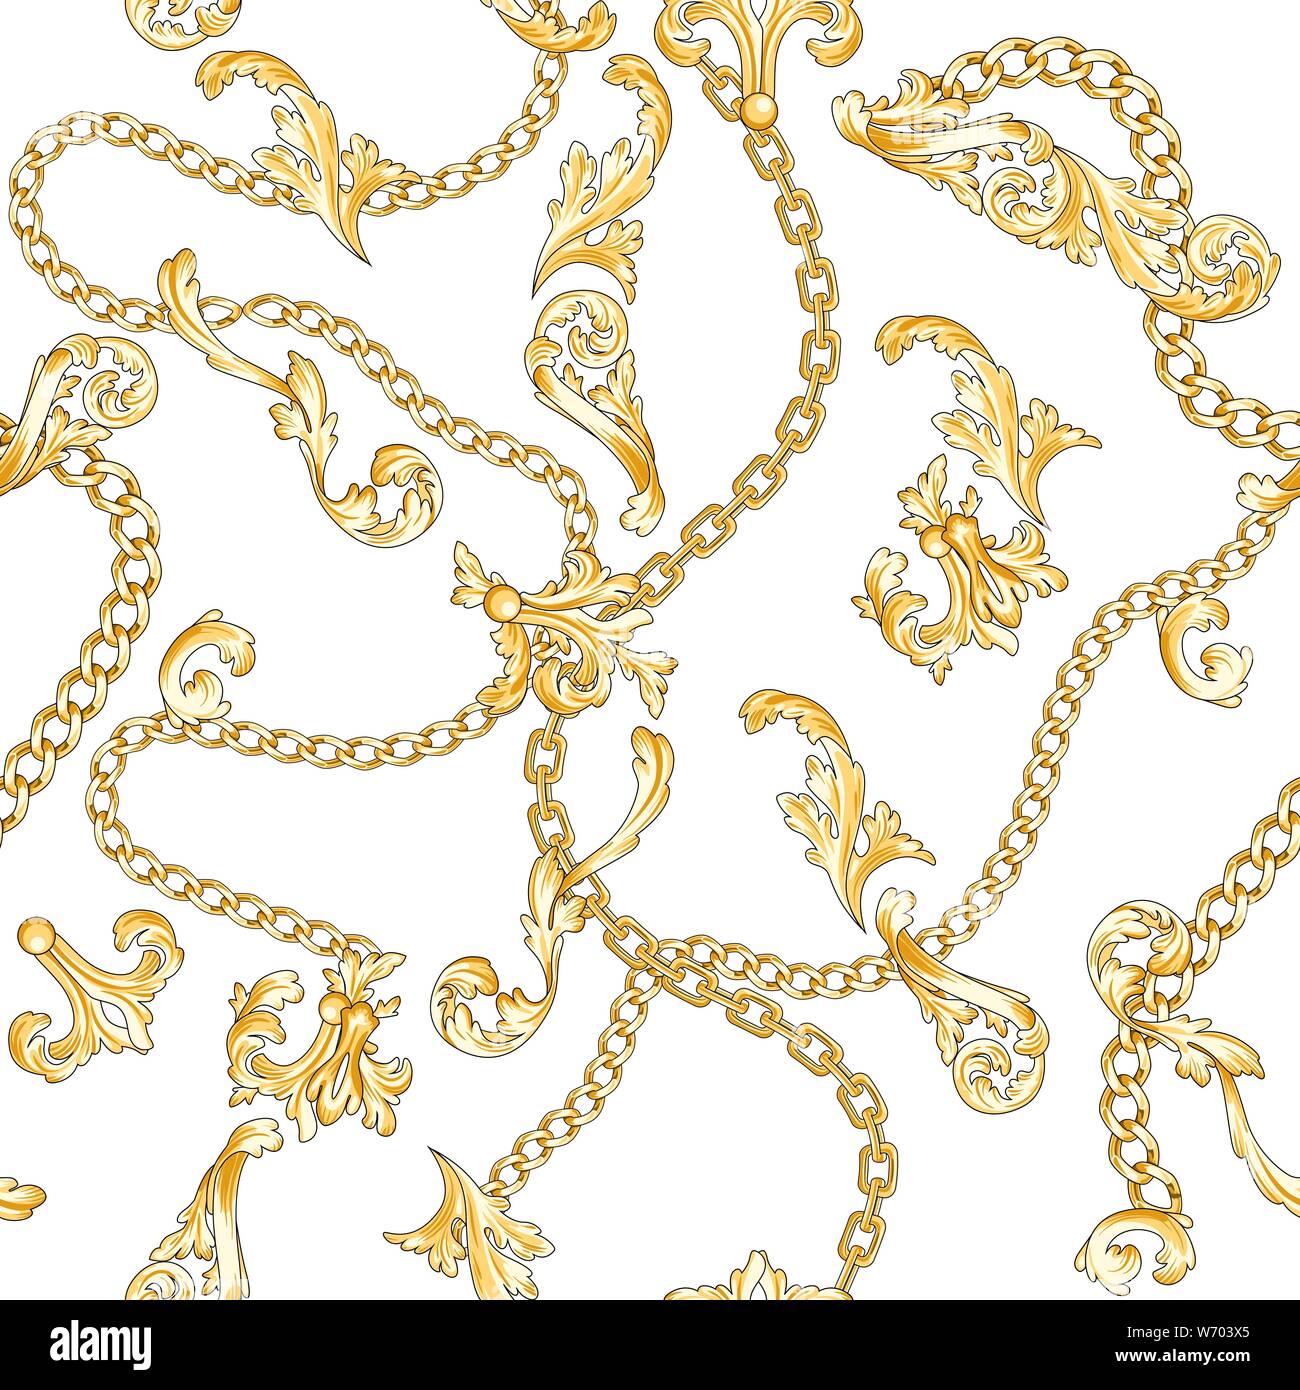 flourishes and chains mix Stock Vector